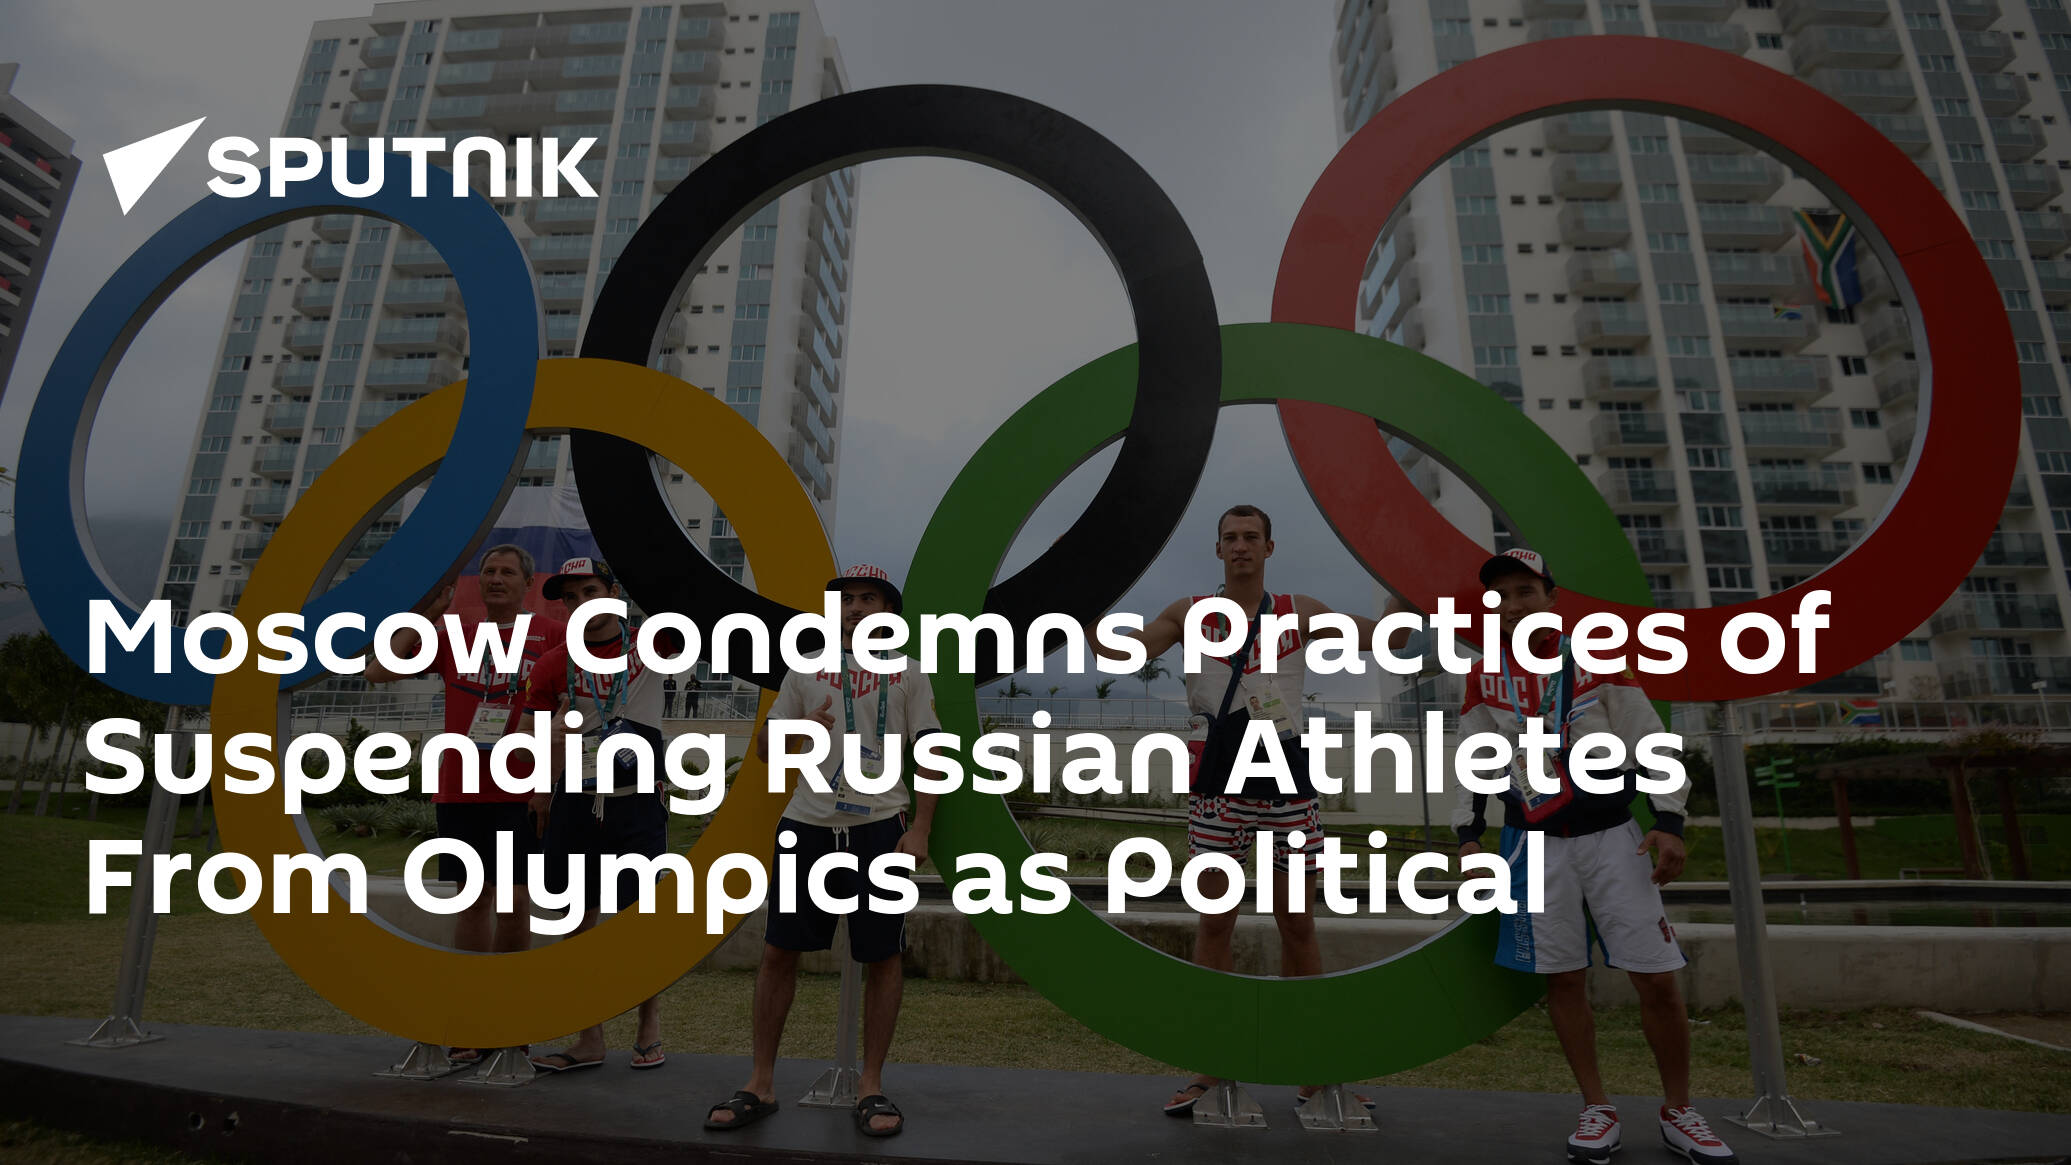 Moscow Condemns Practices of Suspending Russian Athletes From Olympics as Political